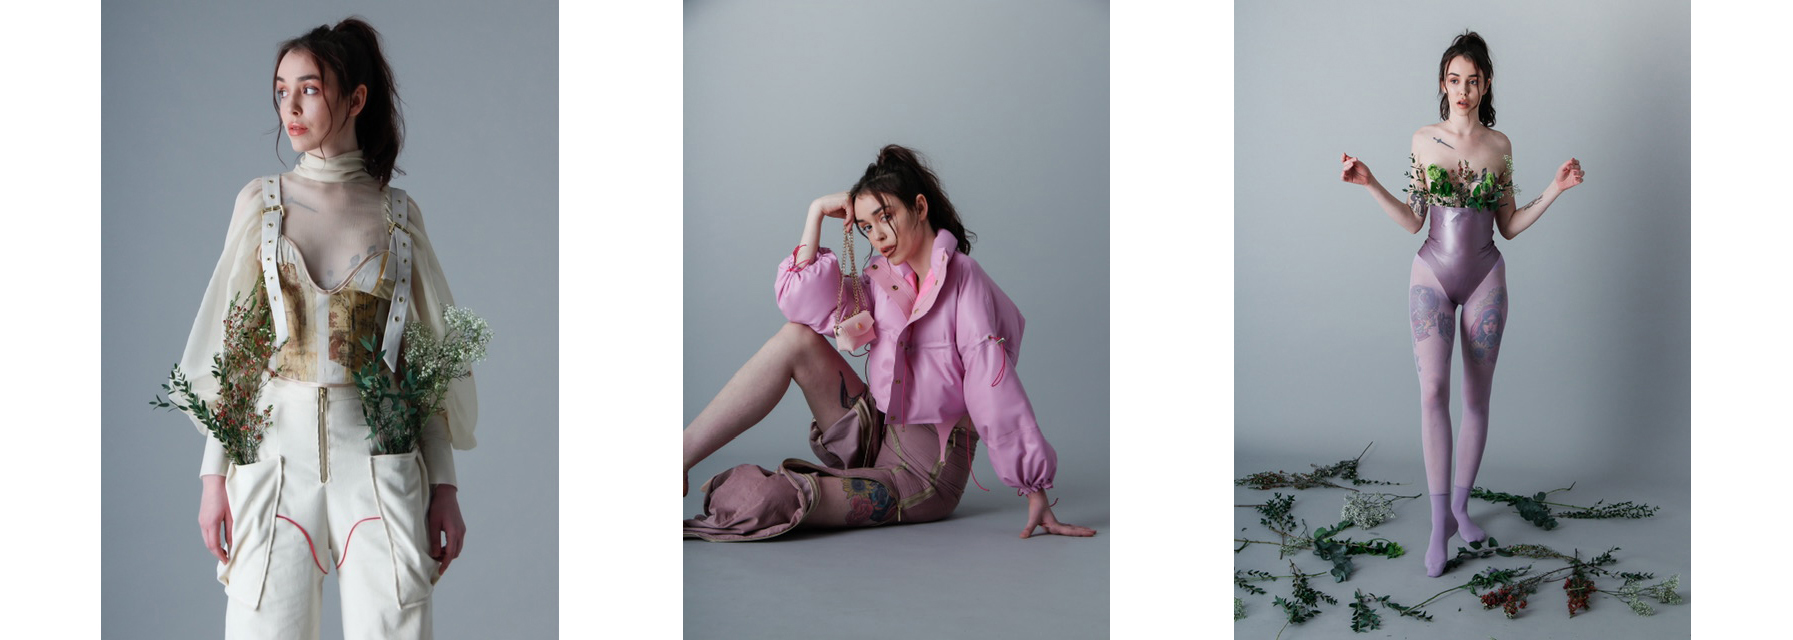 Three images combined of a model wearing pink clothing with ivy entwined